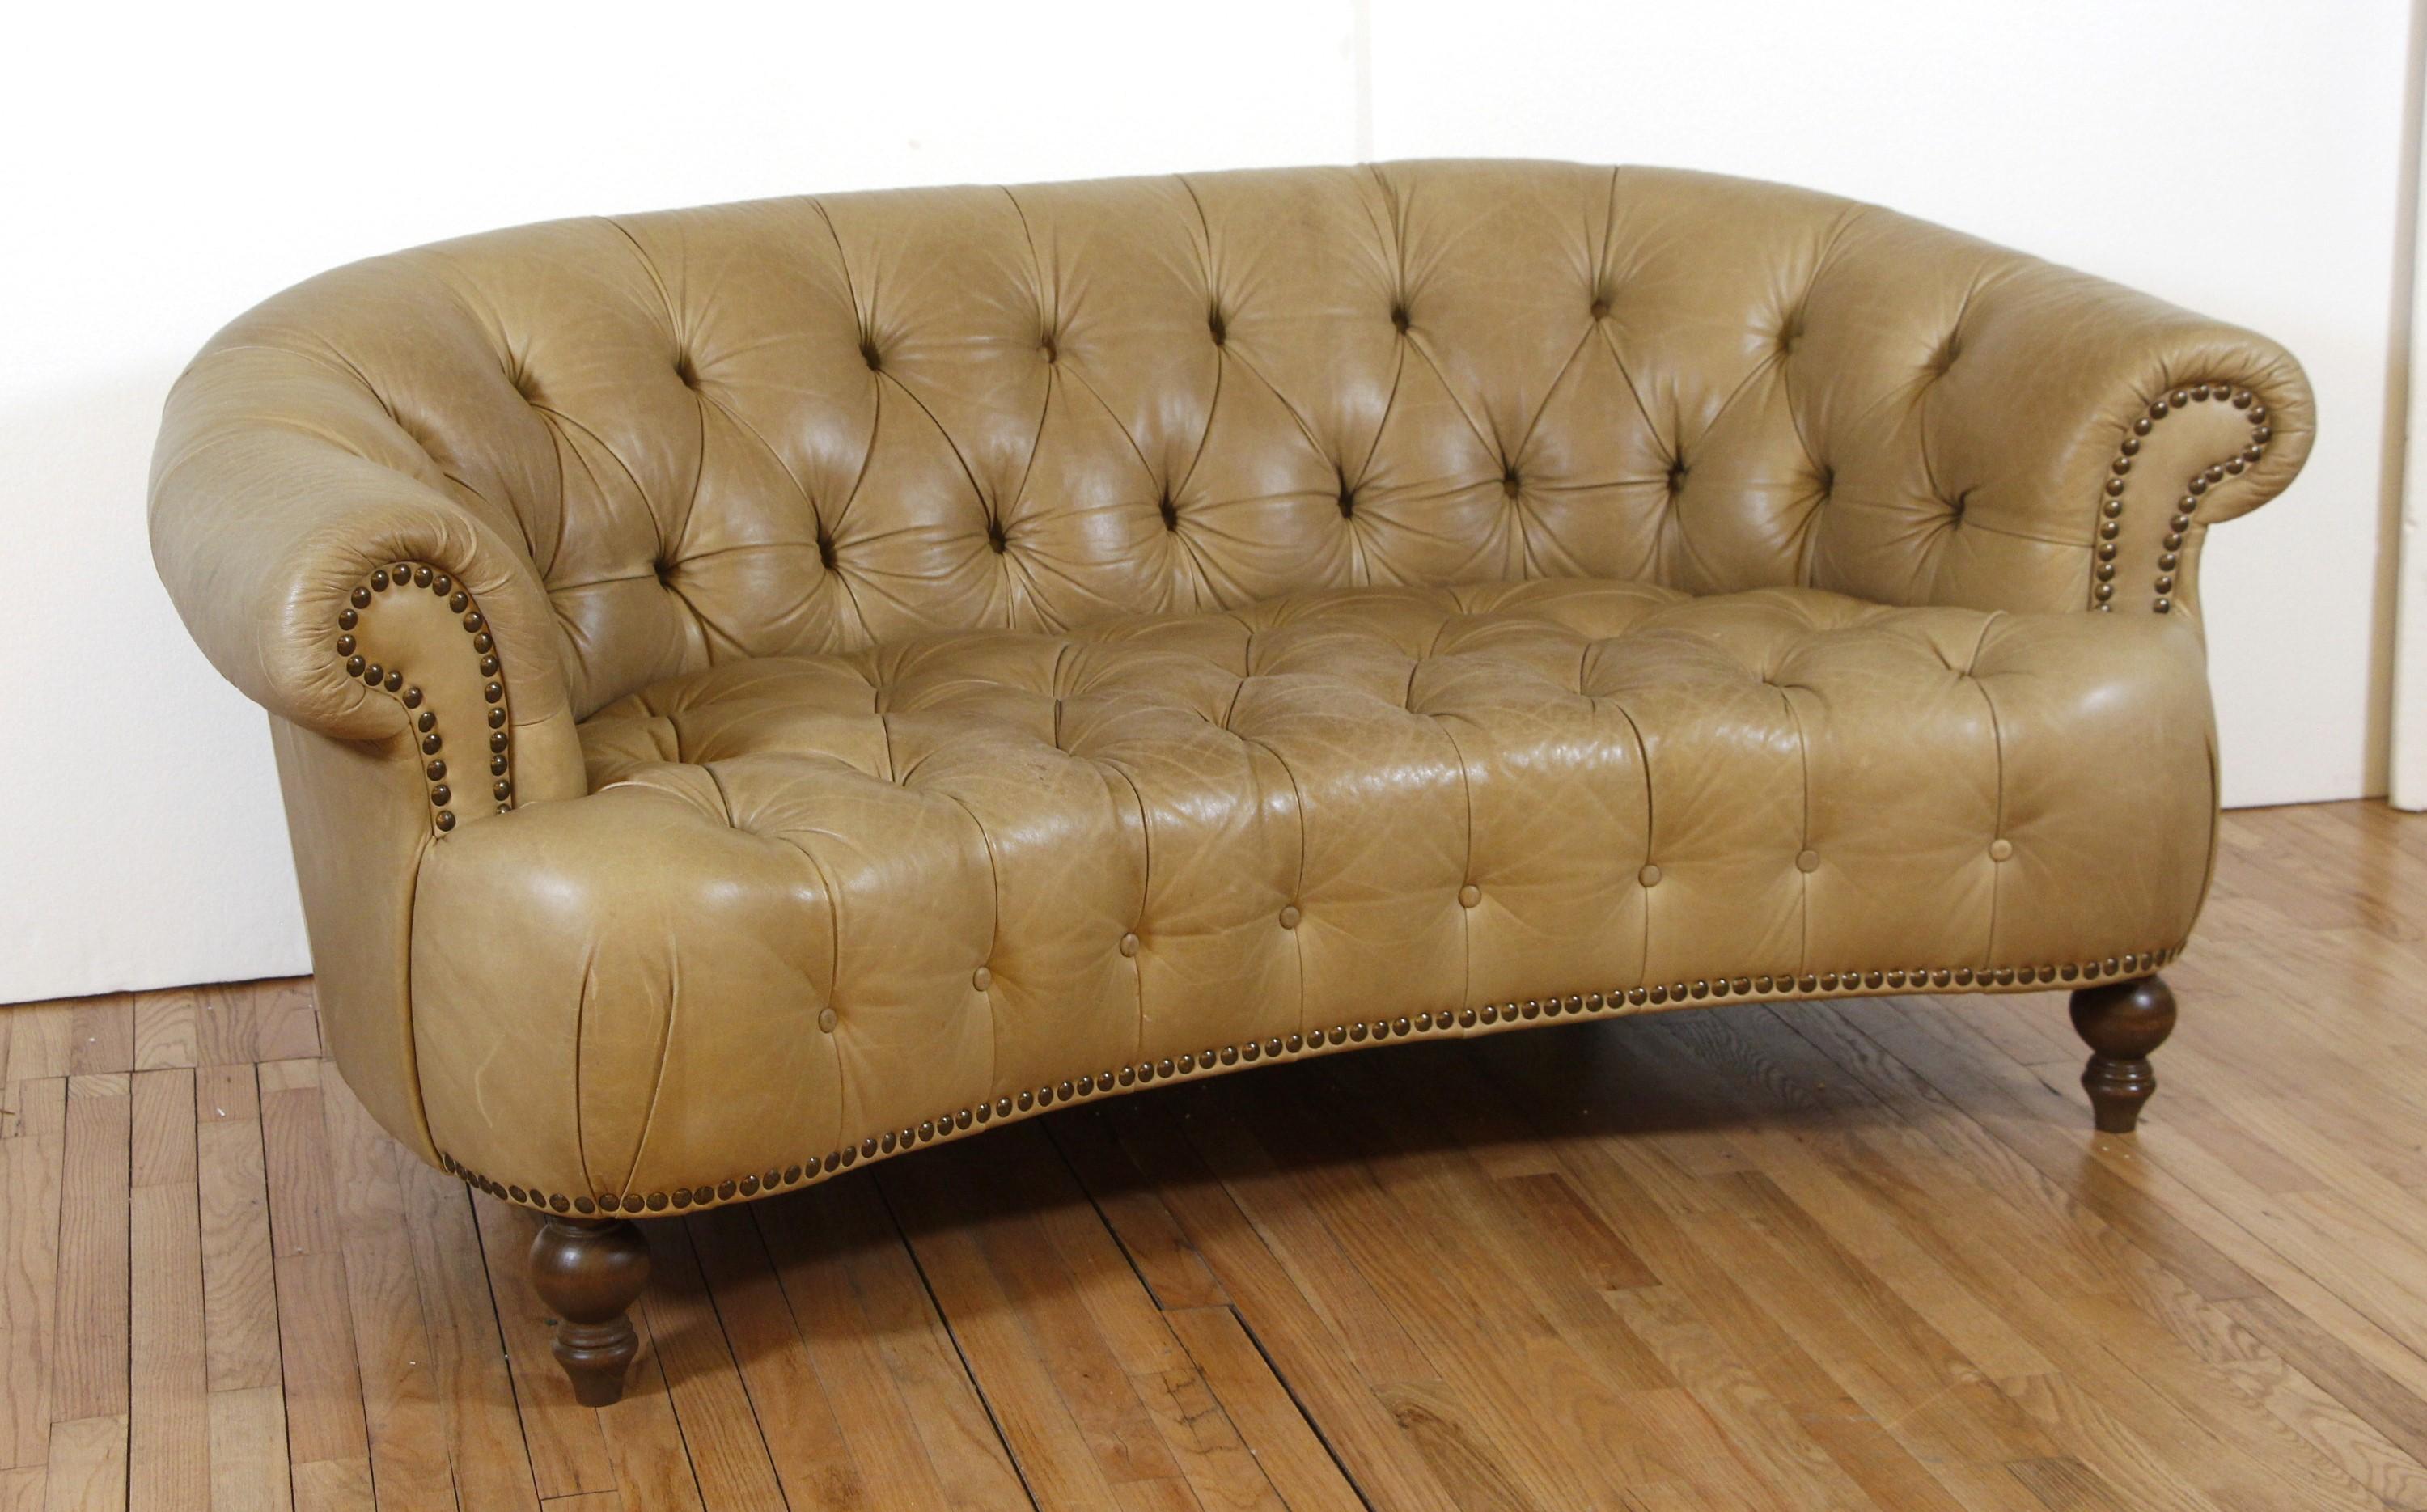 Italian made tan tufted leather sofa with curved back. This Chesterfield style sofa has nailheads throughout and stylish wooden feet. Tan - 73 in.

 